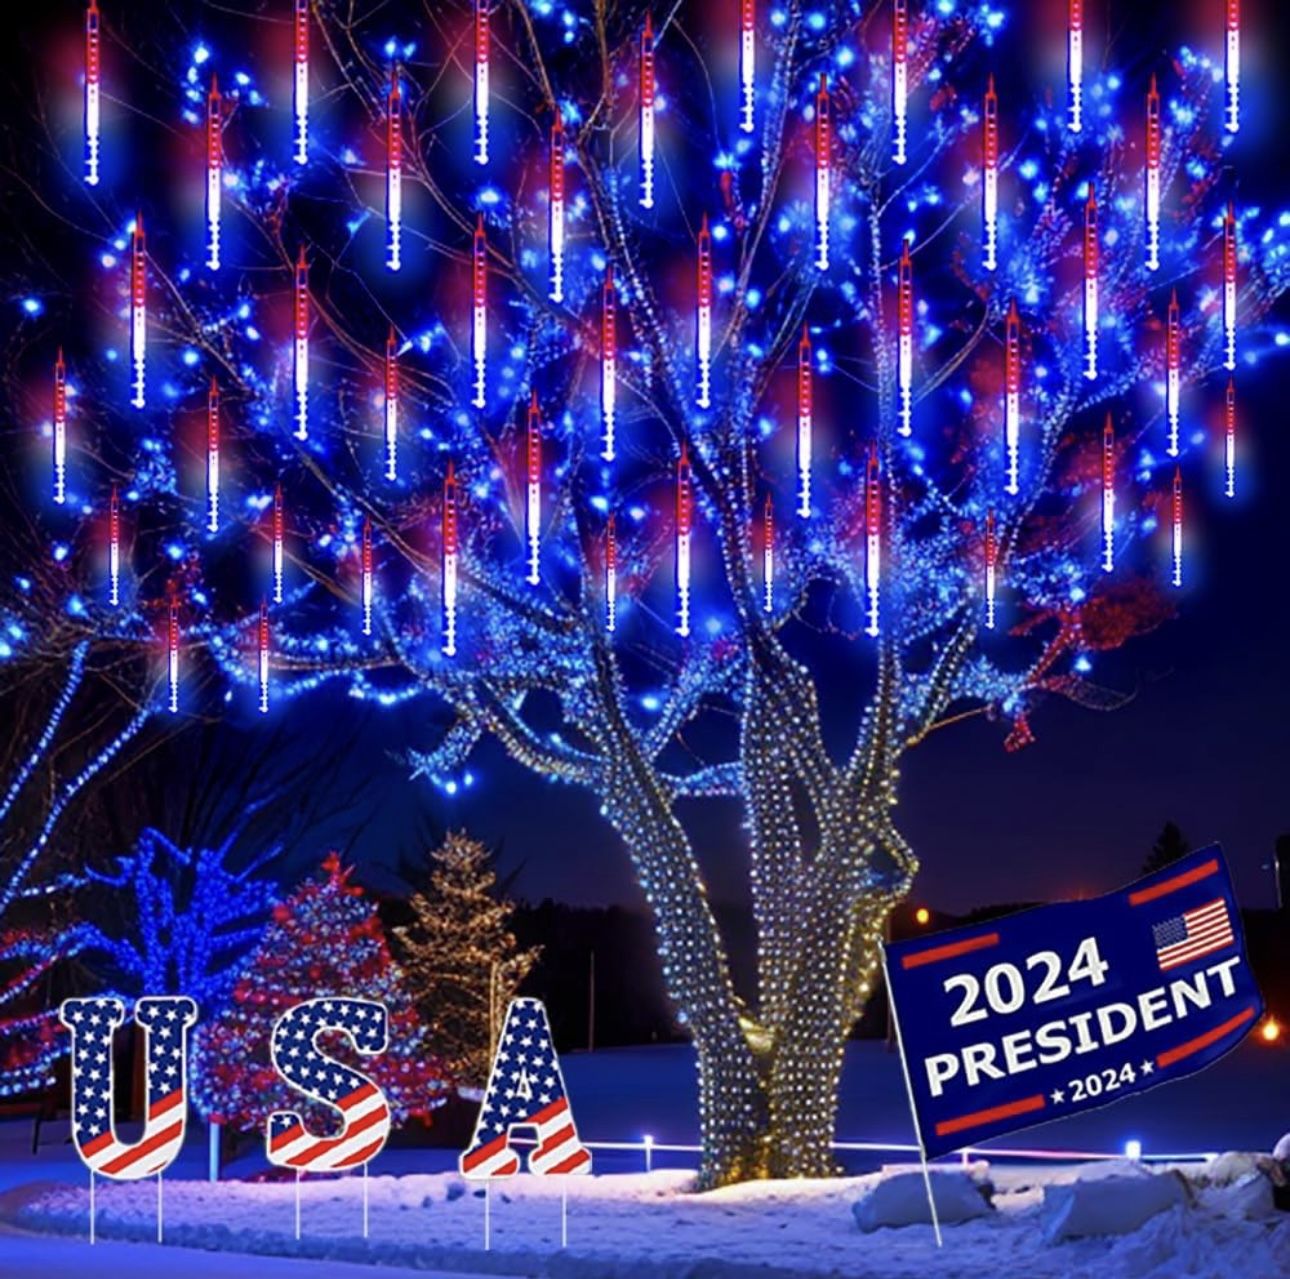 4th of July Decorations Outdoor, Red White Blue Meteor Shower Lights for Independence National Memorial Day, US Flag Lights for 2024 President Electio